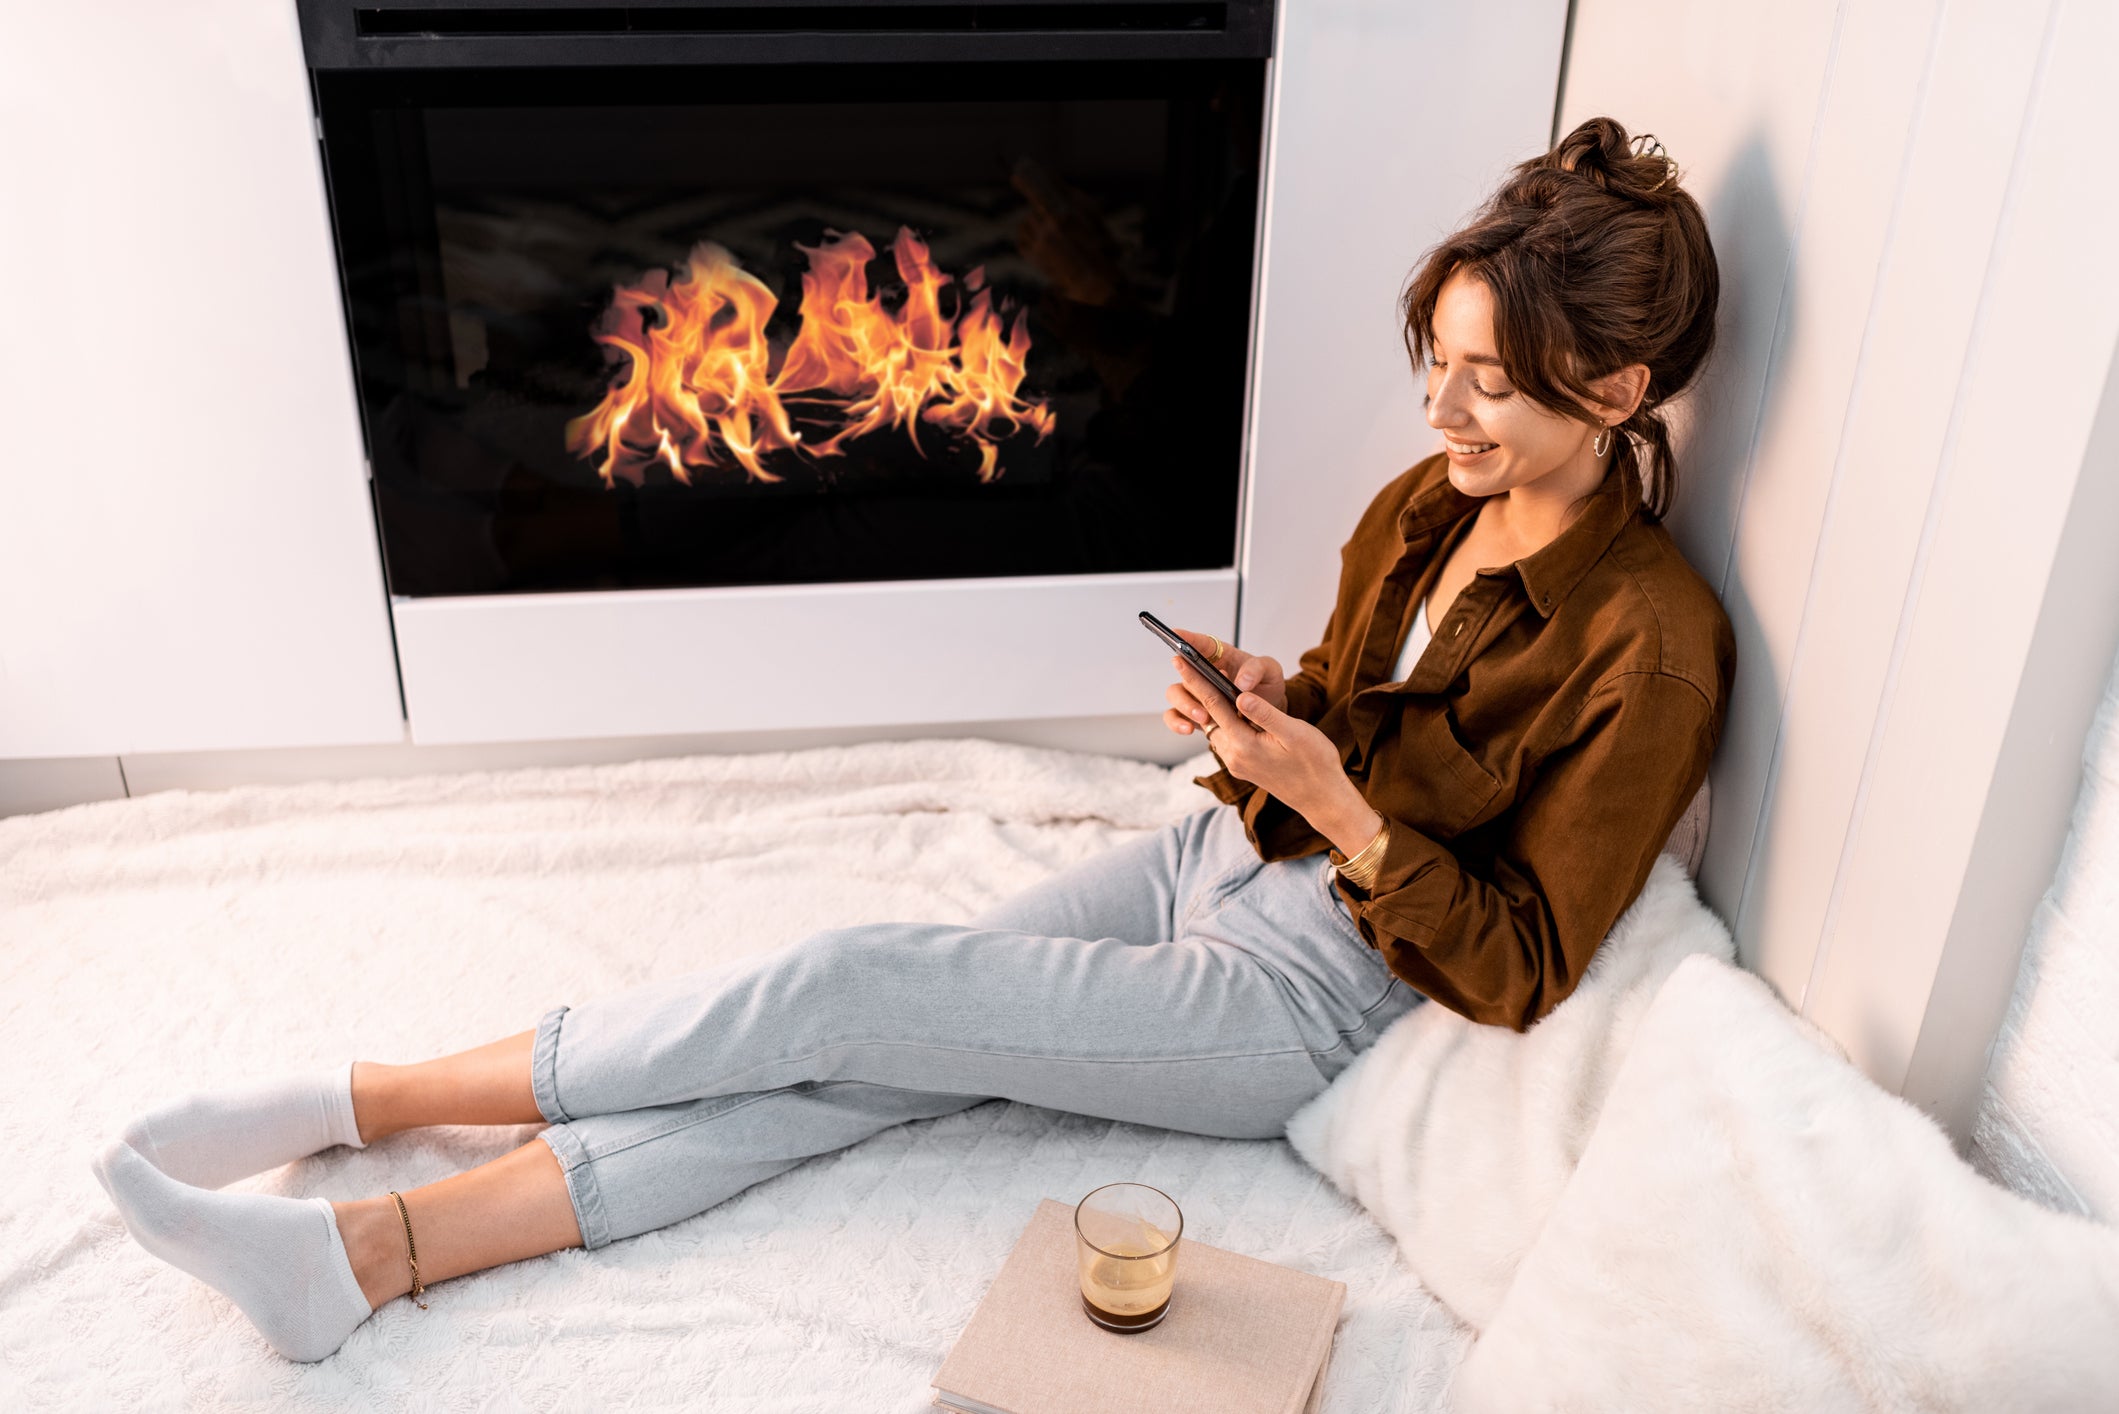 a young woman sits comfortably on the ground near a fireplace with a phone in hand